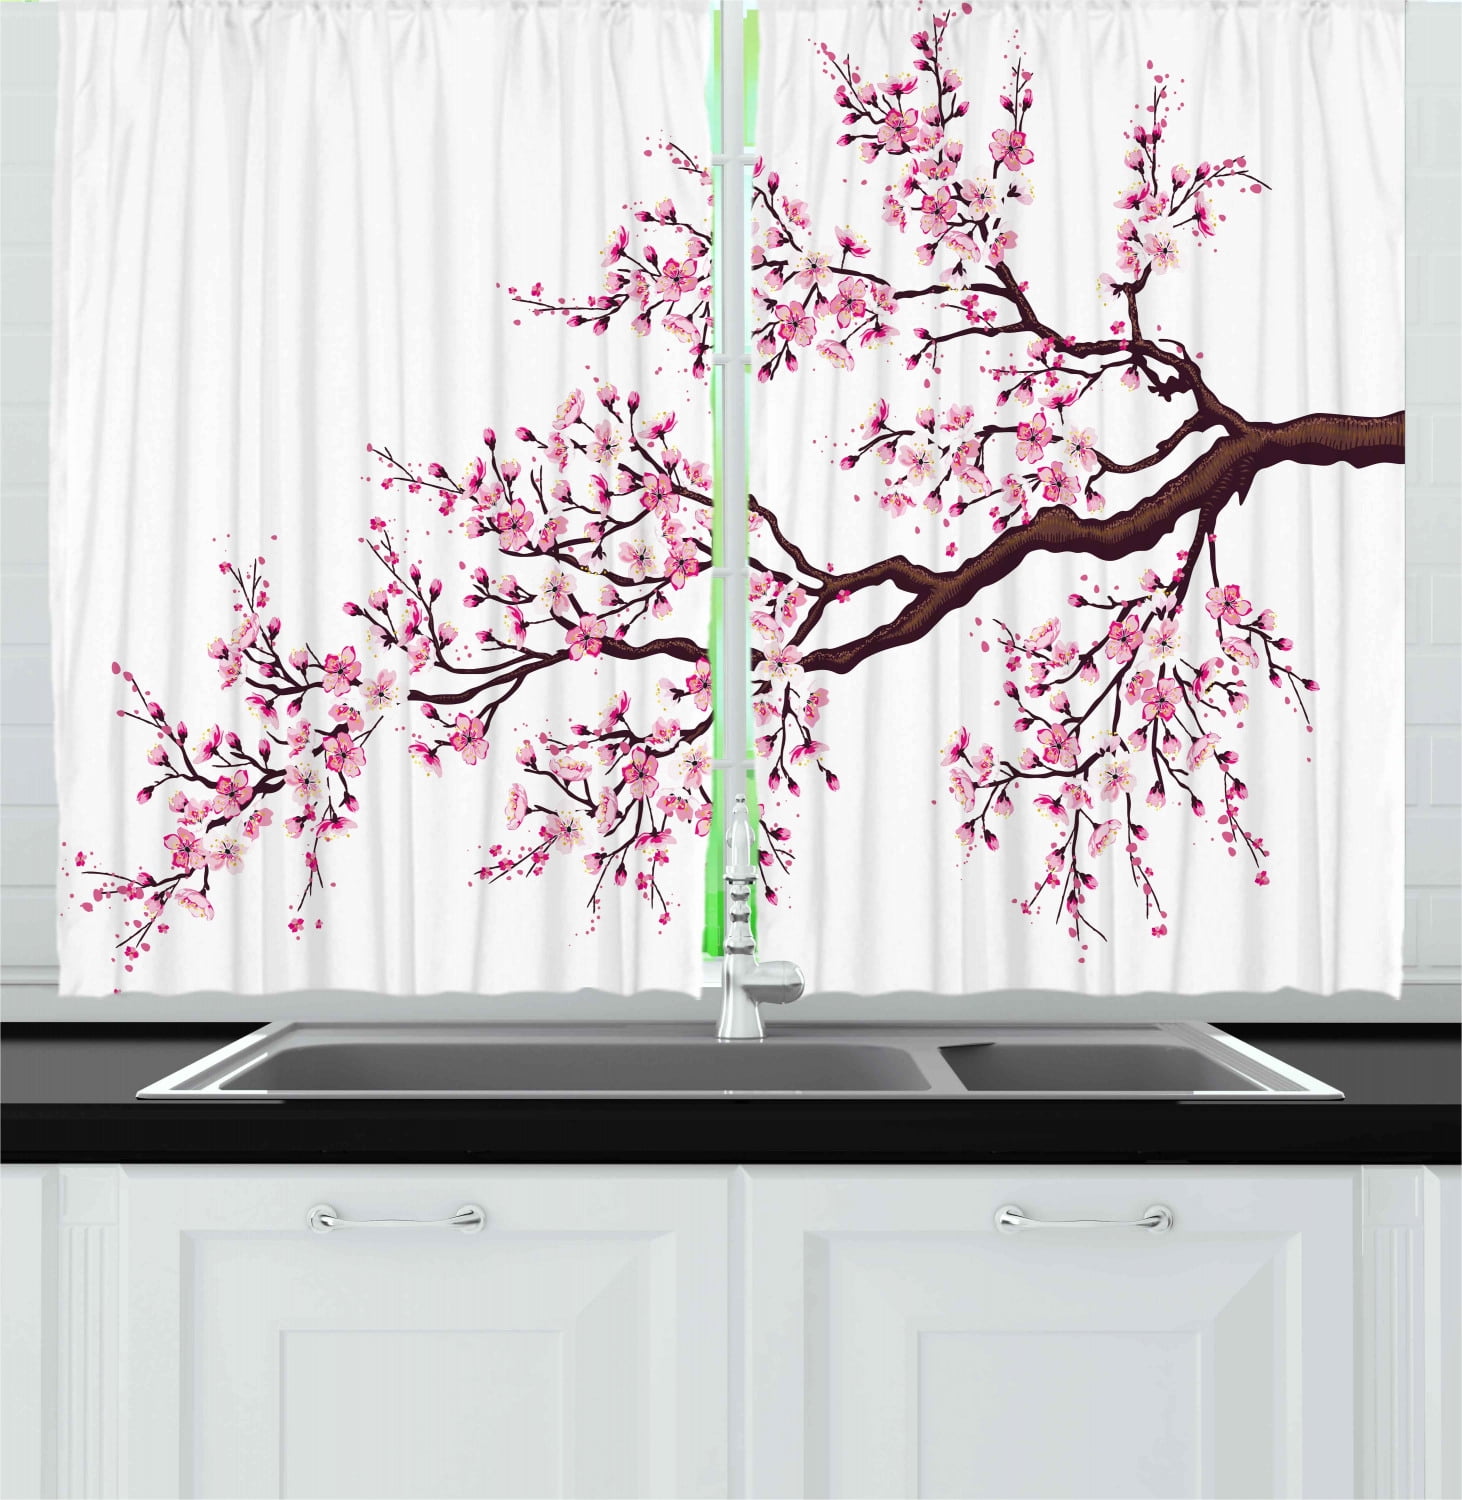 Japan Lanterns and Cherry Blossoms Window Drapes Kitchen Curtains 2 Panel 55*39" 